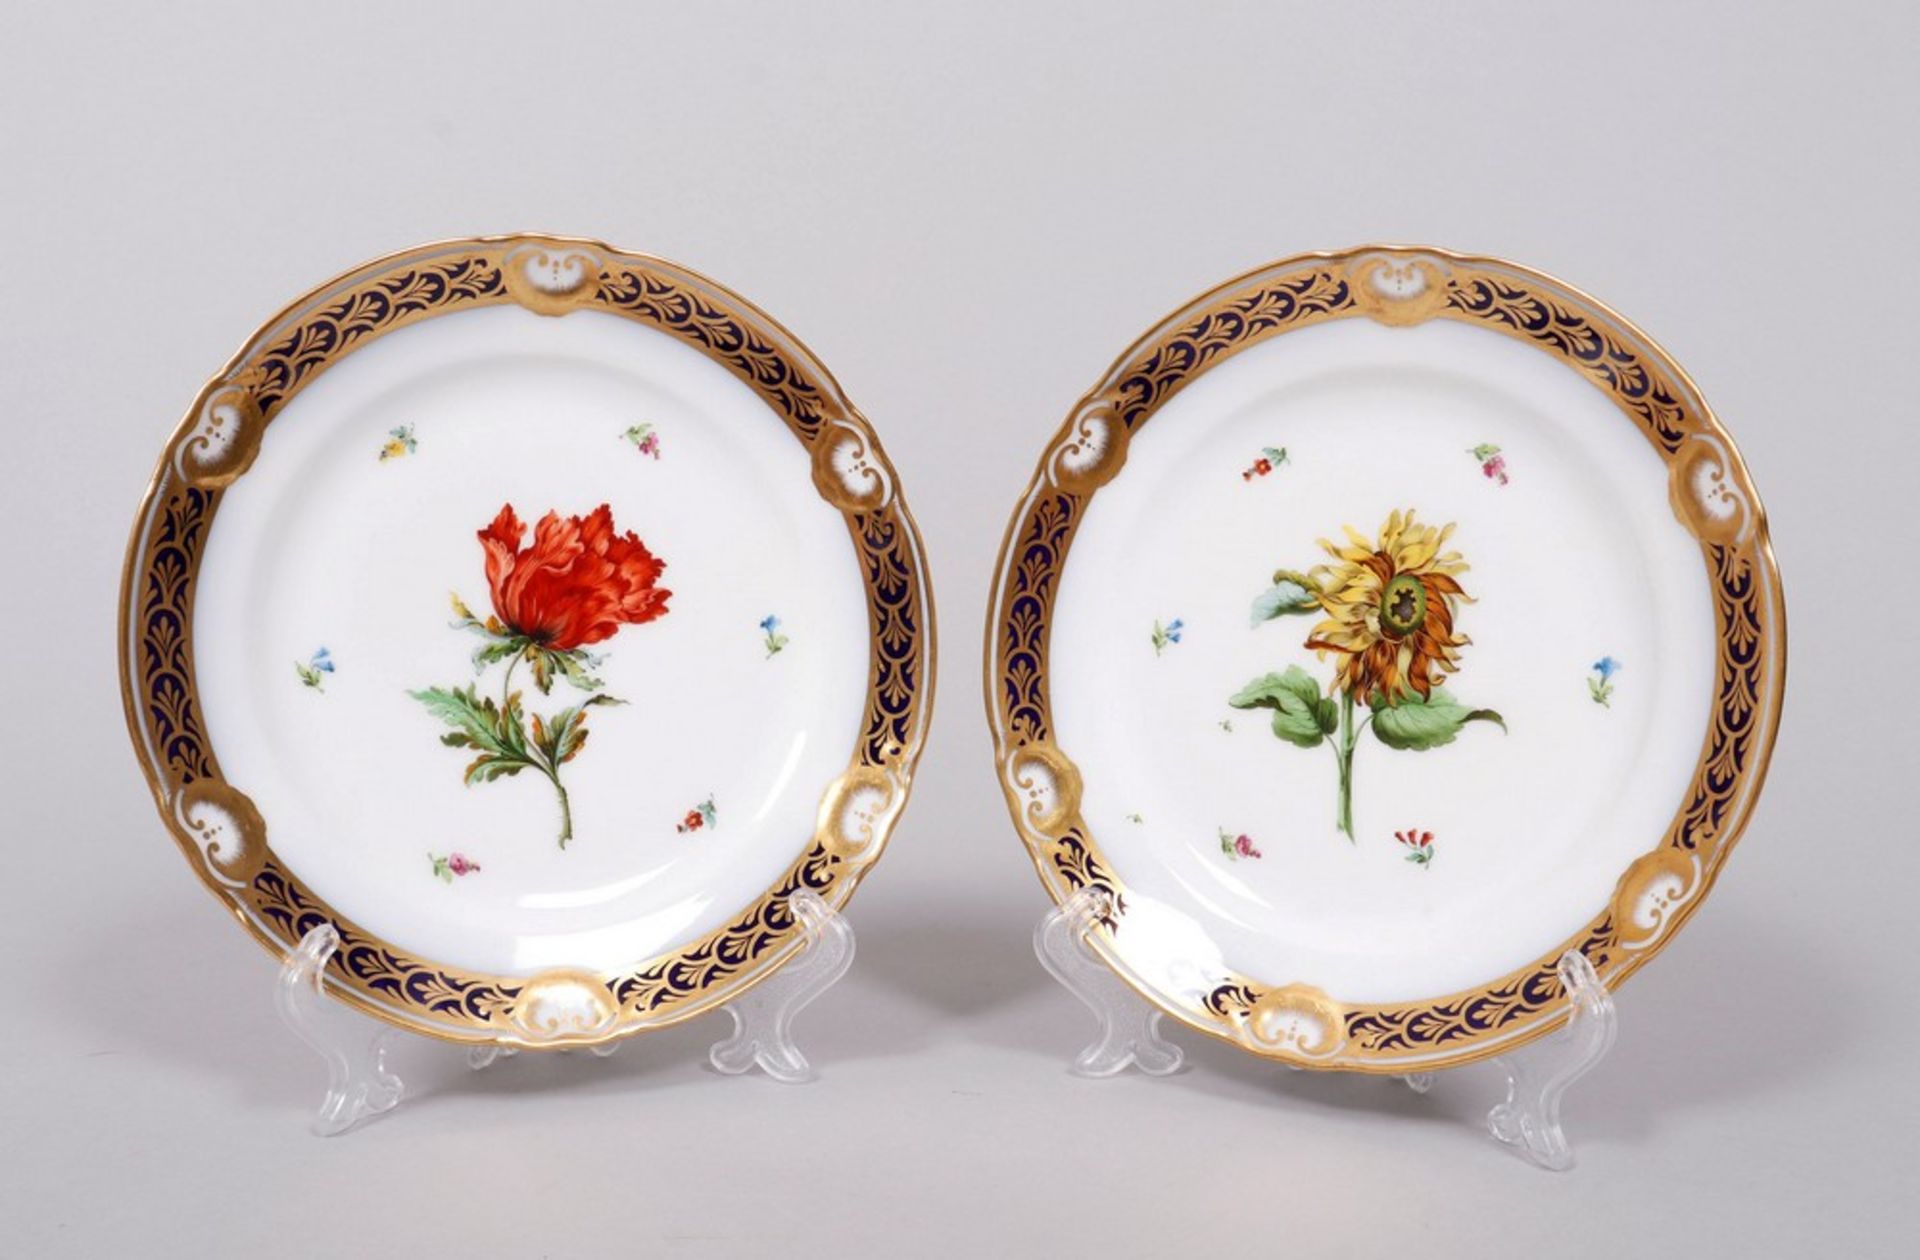 11 cake plates, Imperial Vienna, c. 1808 - Image 6 of 12